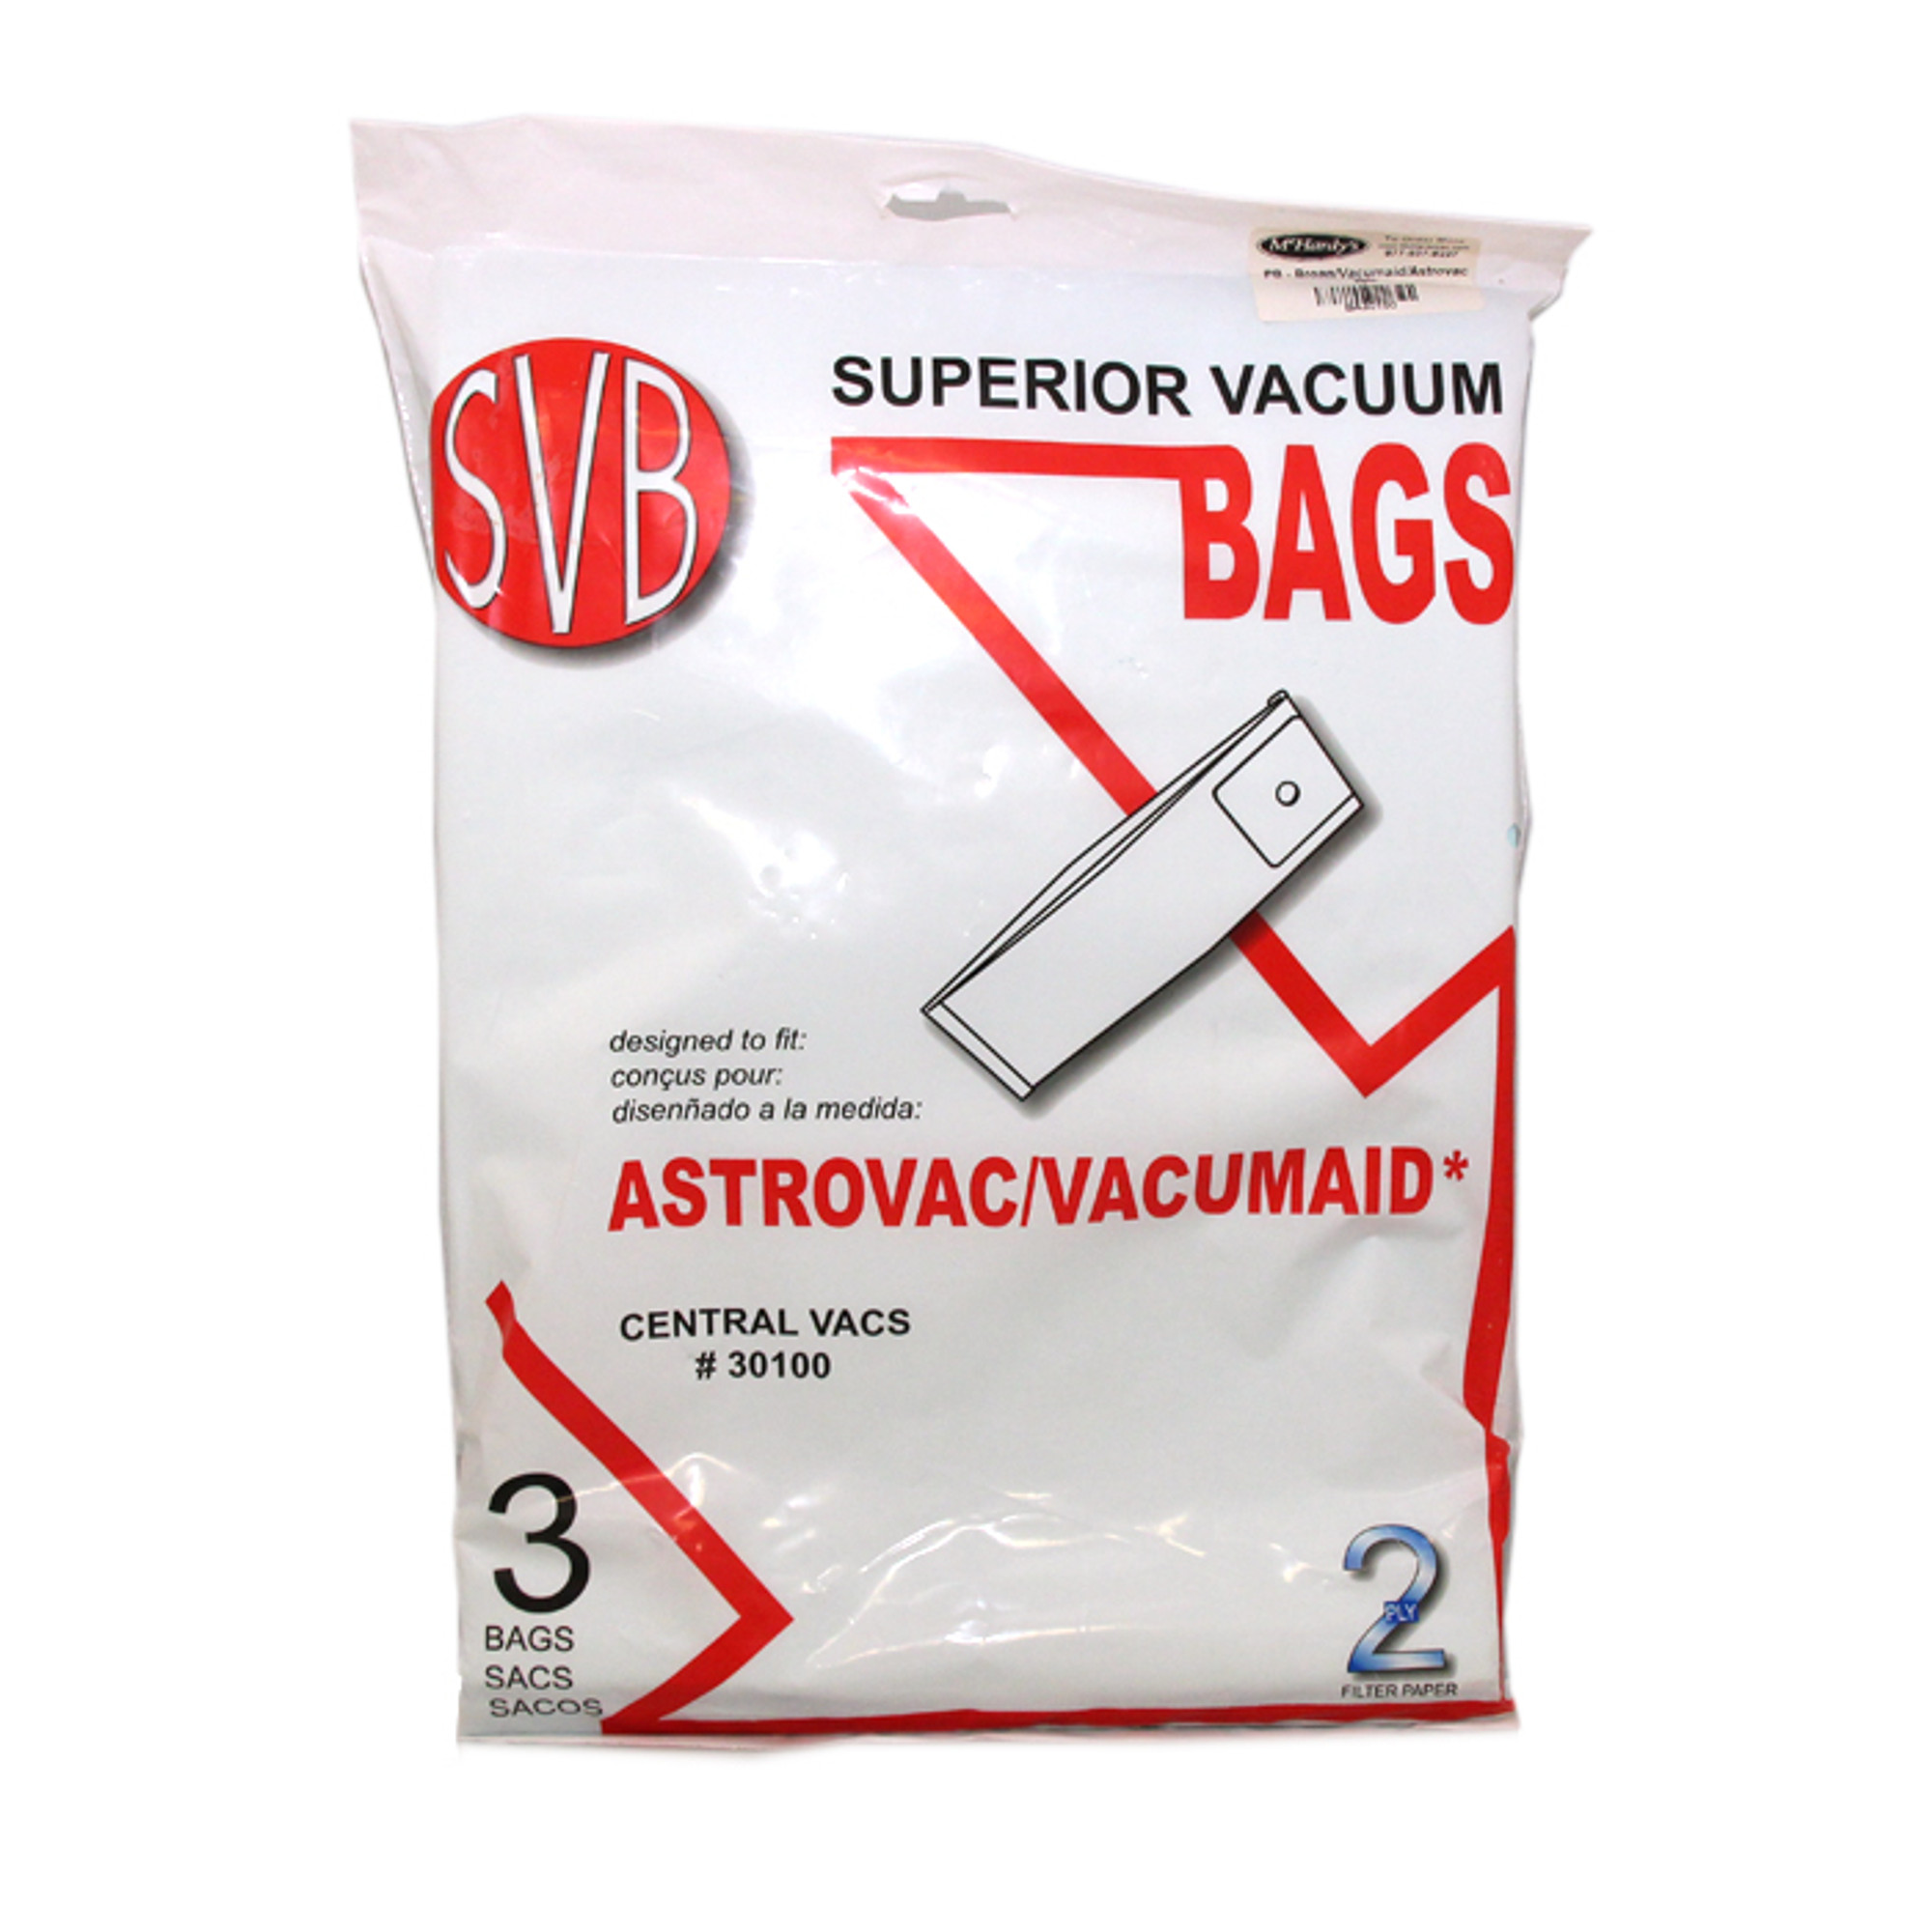 Buy Astrovac and Vacumaid Central Vacuum Bags from Canada at